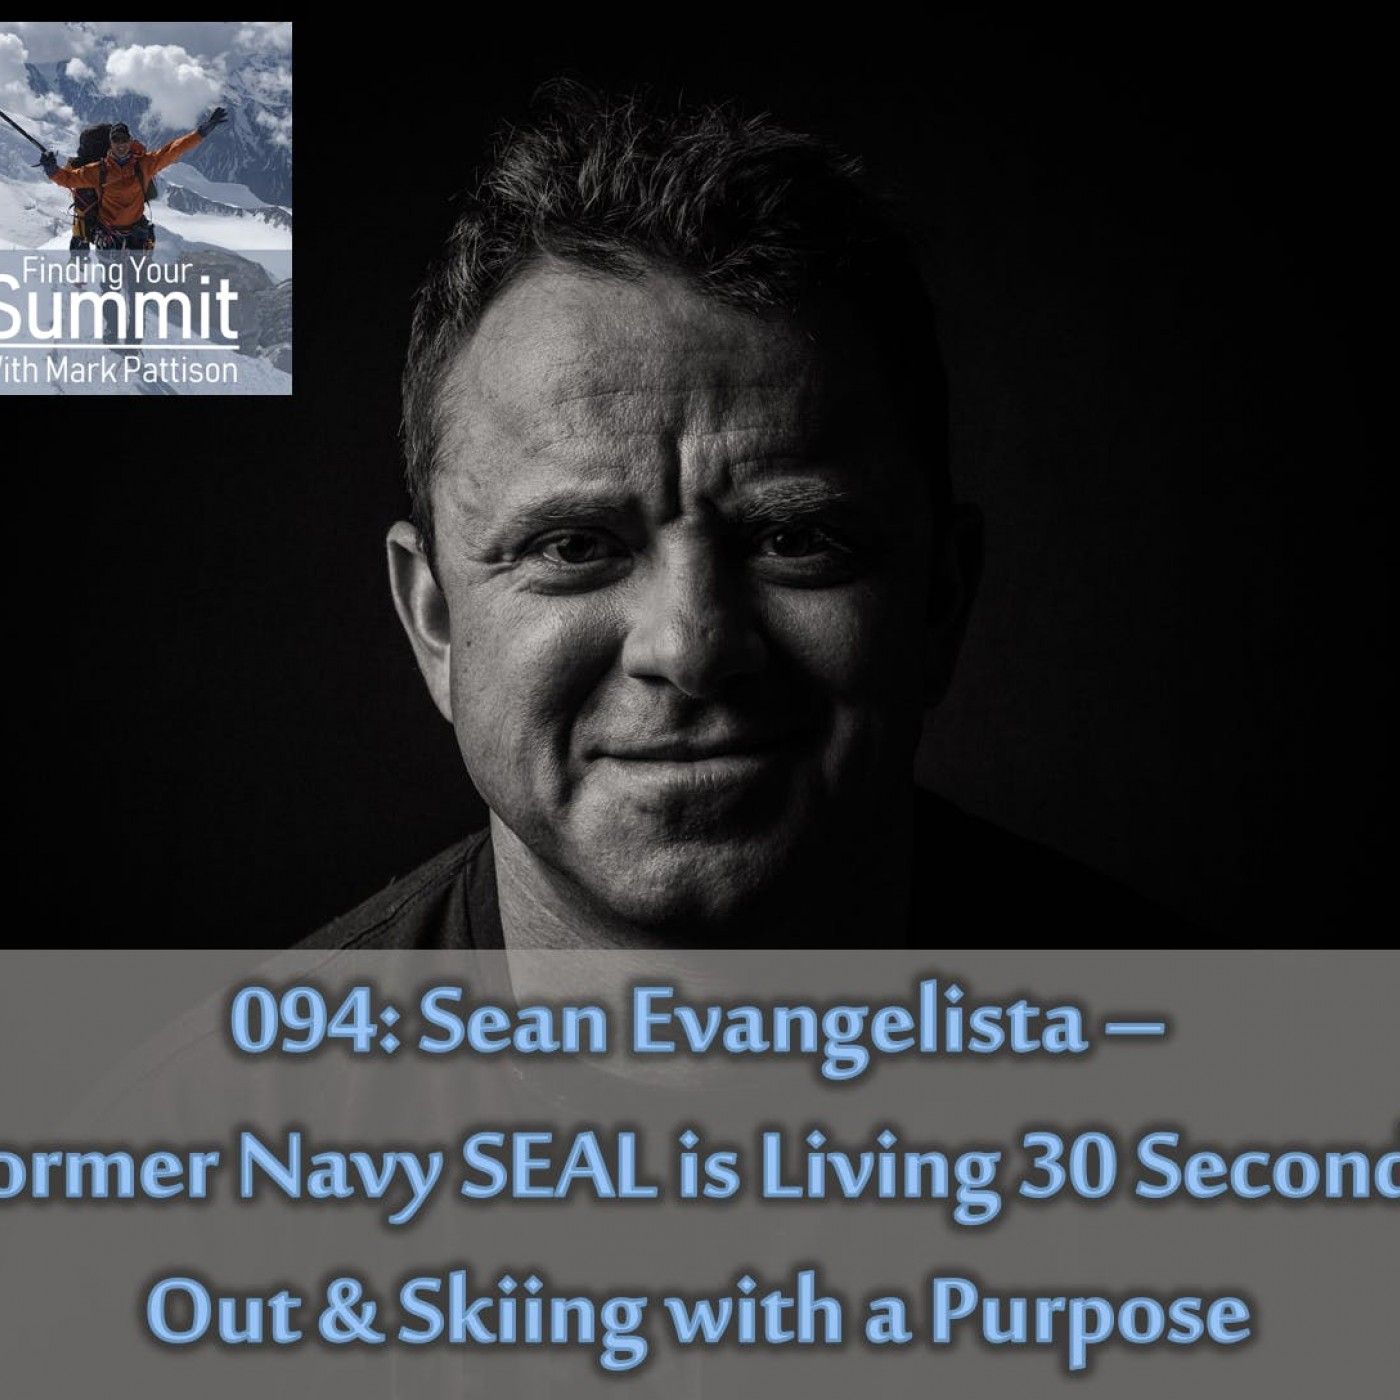 Sean Evangelista - Navy SEAL is Living 30 Seconds Out & Skiing with a Purpose